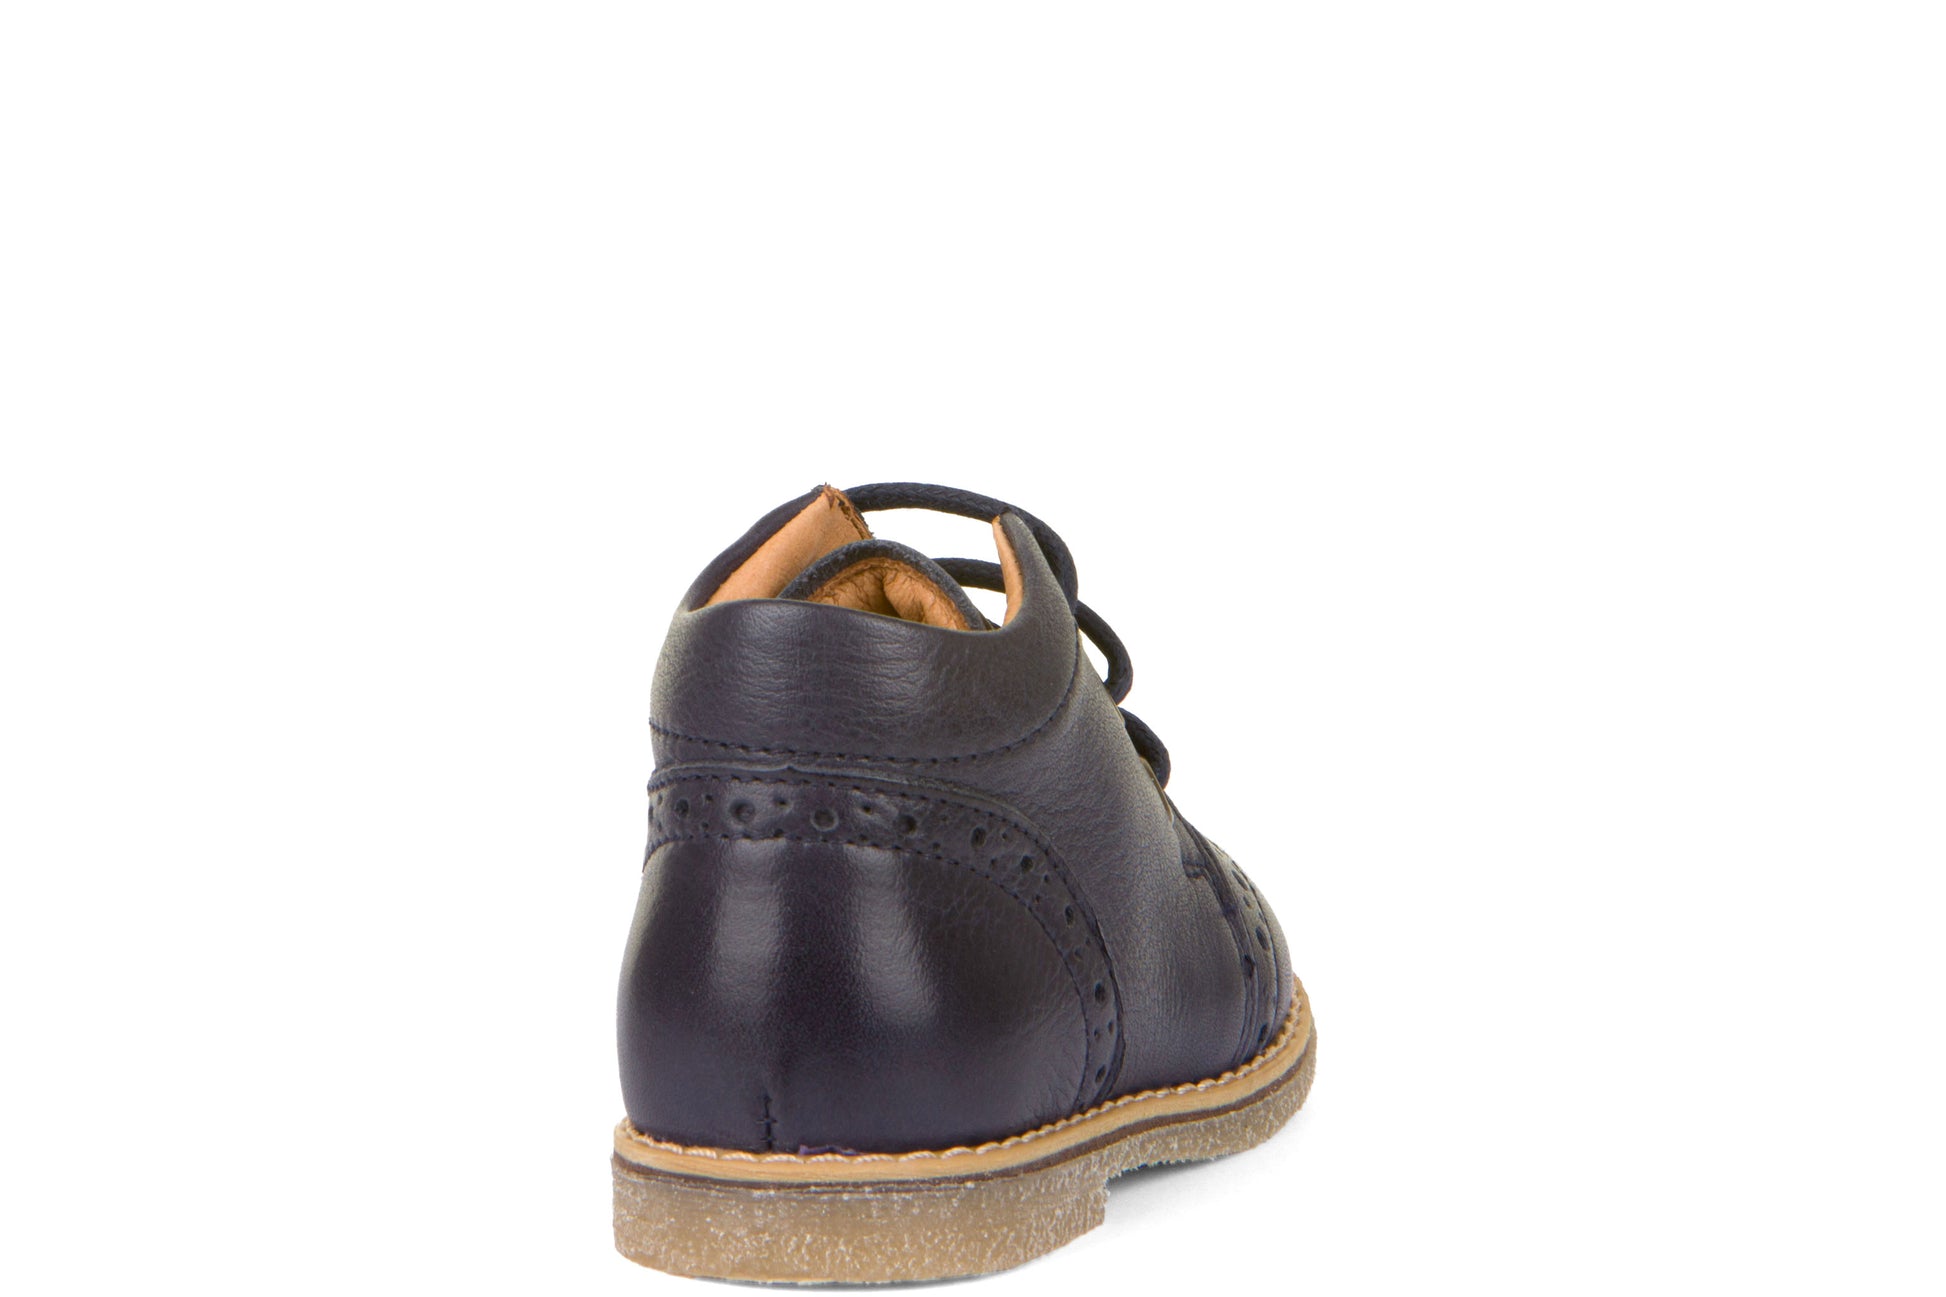 A boys boot by Froddo, style Coper G2130276-2 in Navy with lace-up fastening. Back view.